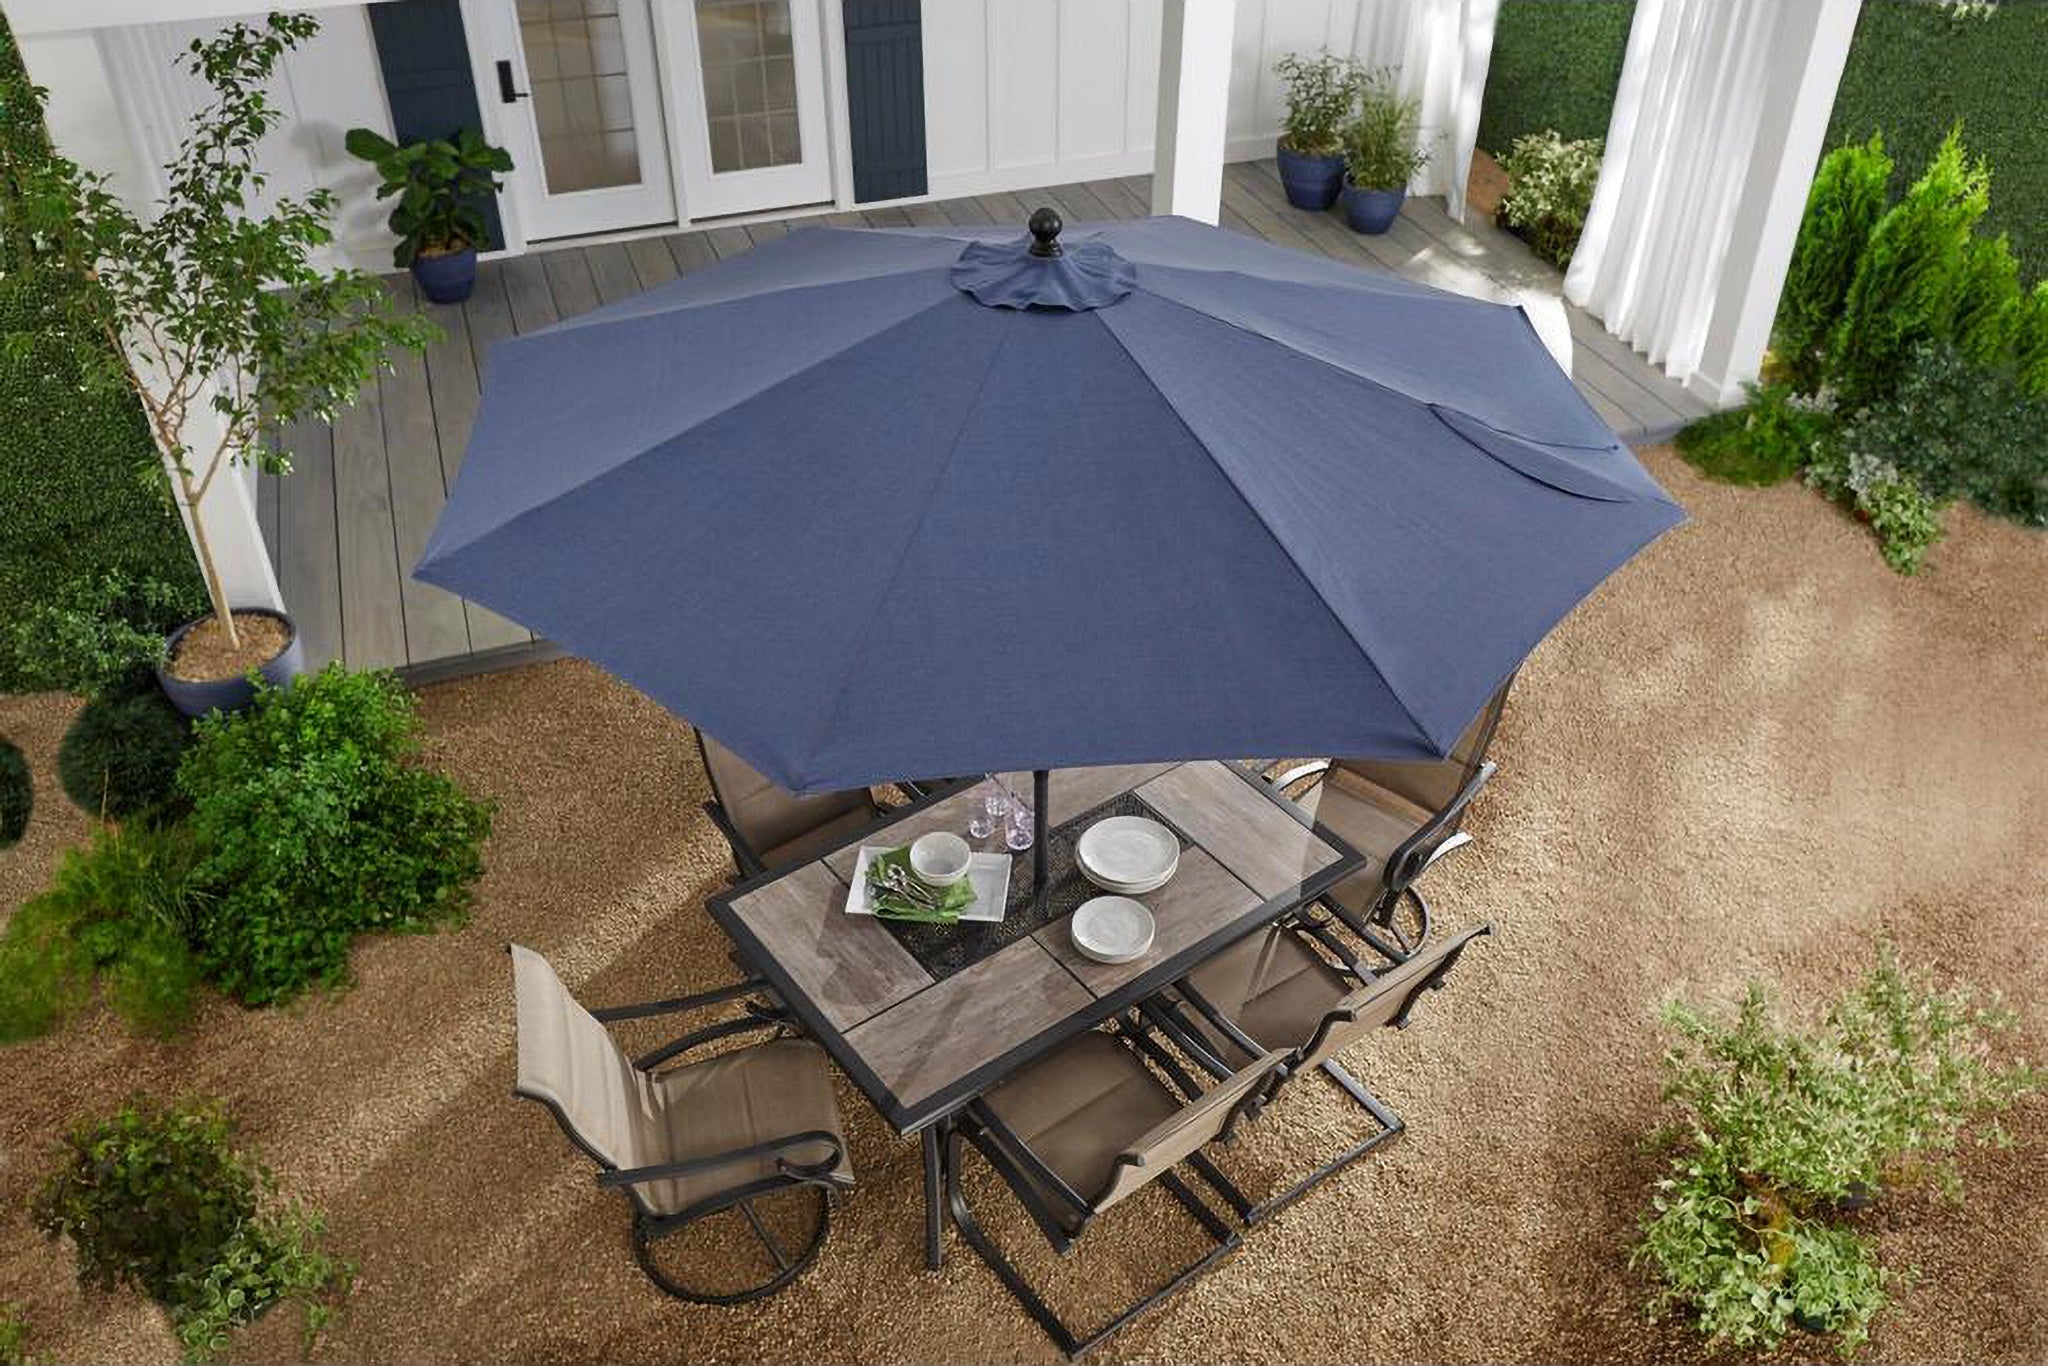 Shade in Style: The Best Outdoor Patio Umbrellas